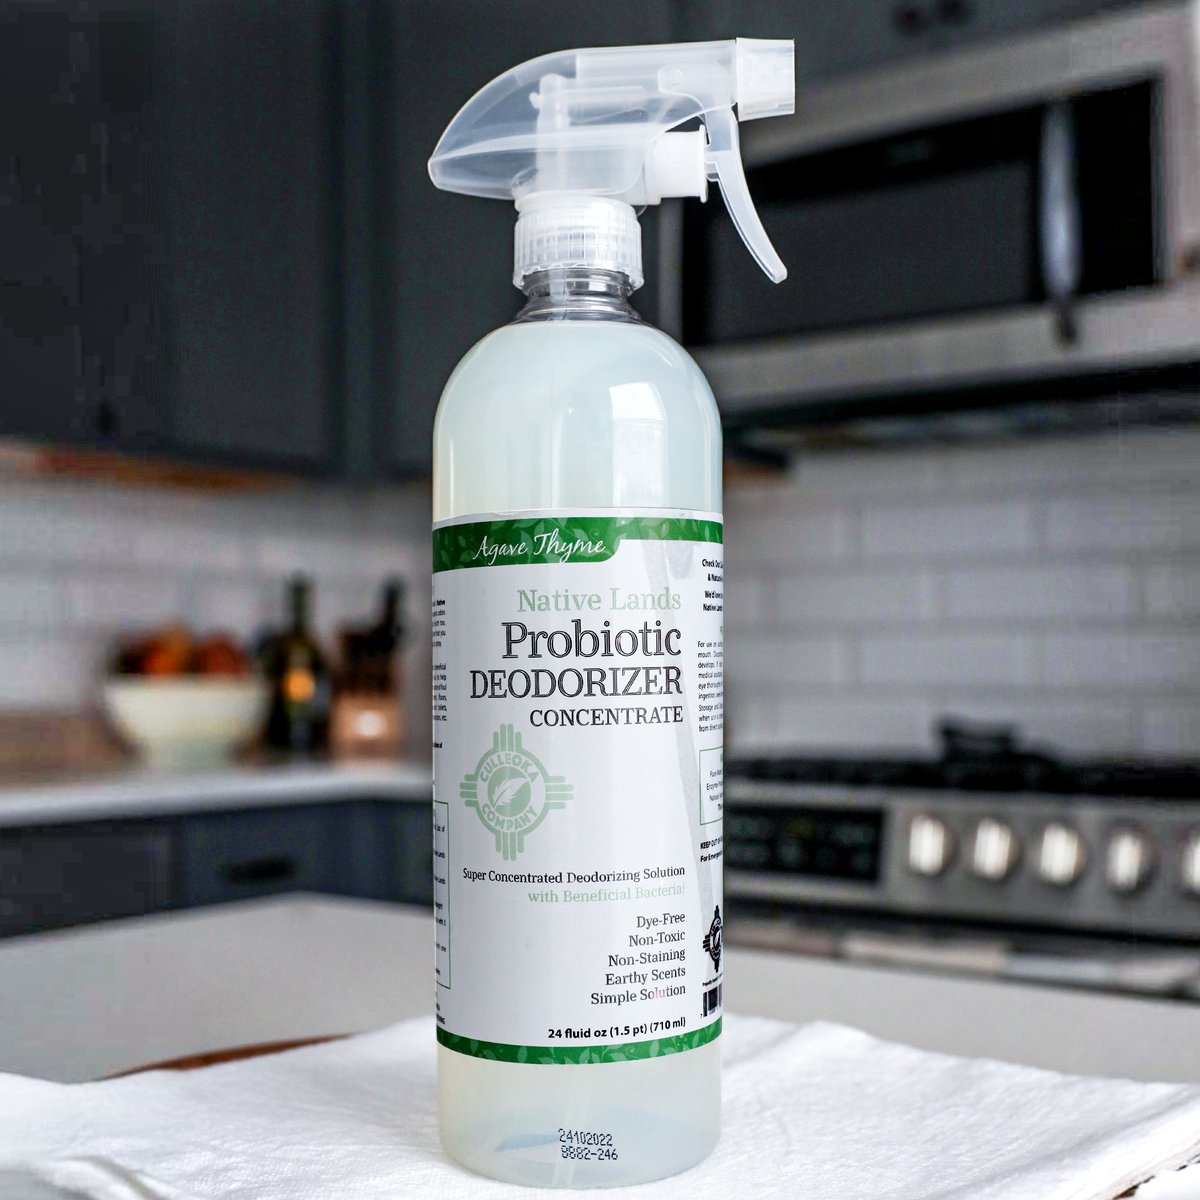 Tired of covering up odors instead of eliminating them? Say hello to our Probiotic Deodorizer Concentrate! Packed with probiotics, it's like having your own odor-fighting army right at home. 
#CulleokaCompany #Cleaning #Clean #HouseCleaning #CleaningTips #CleaningHacks #Home